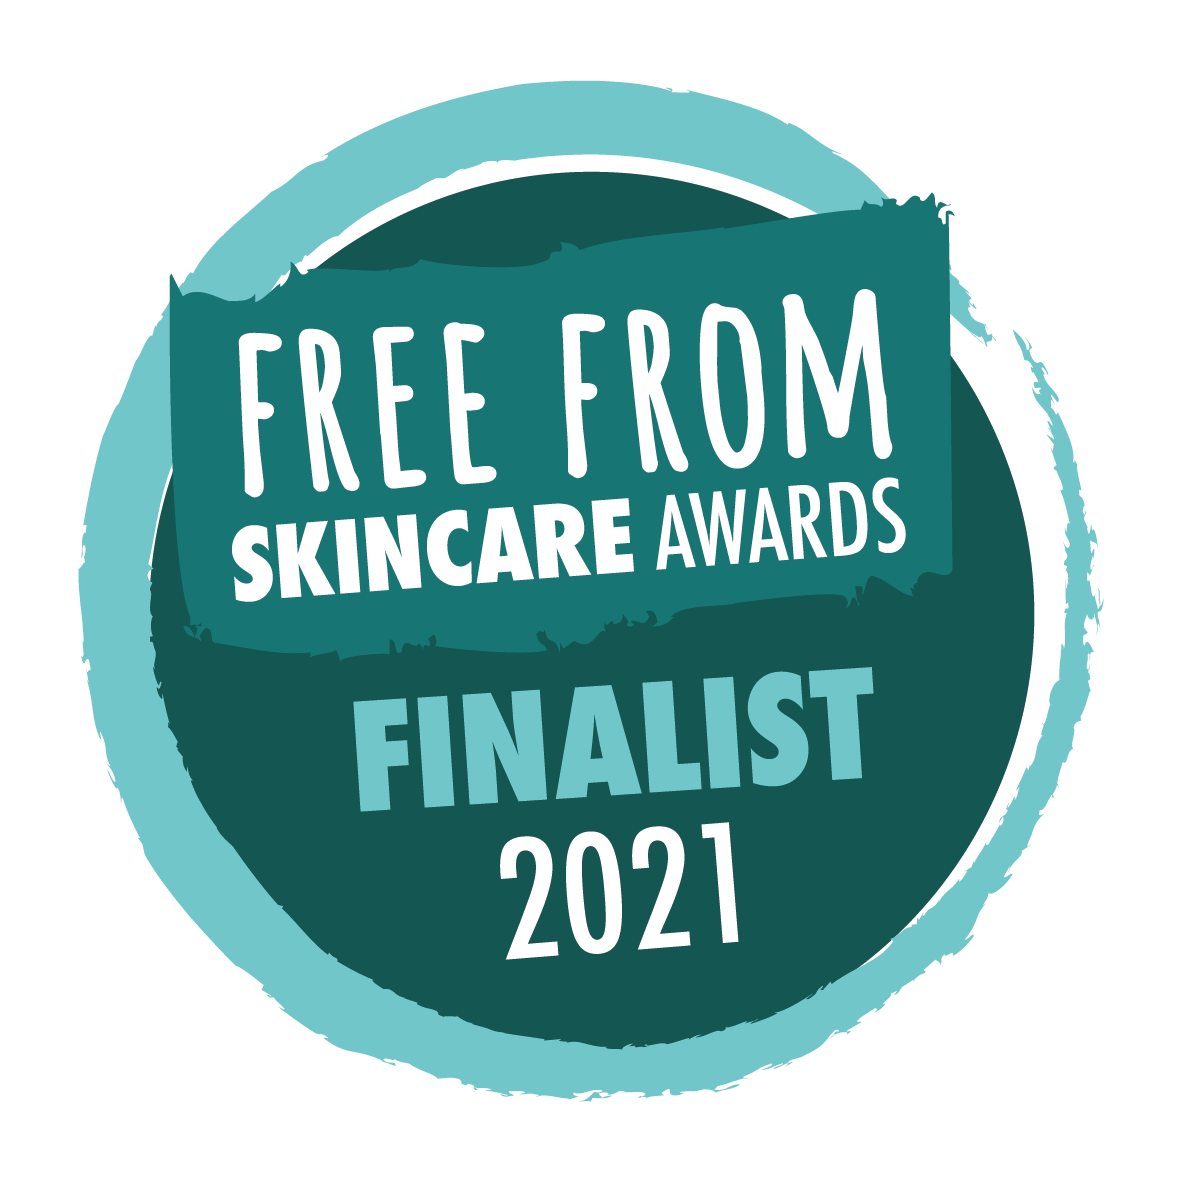 Finalist at the Free from Skincare Awards 2021